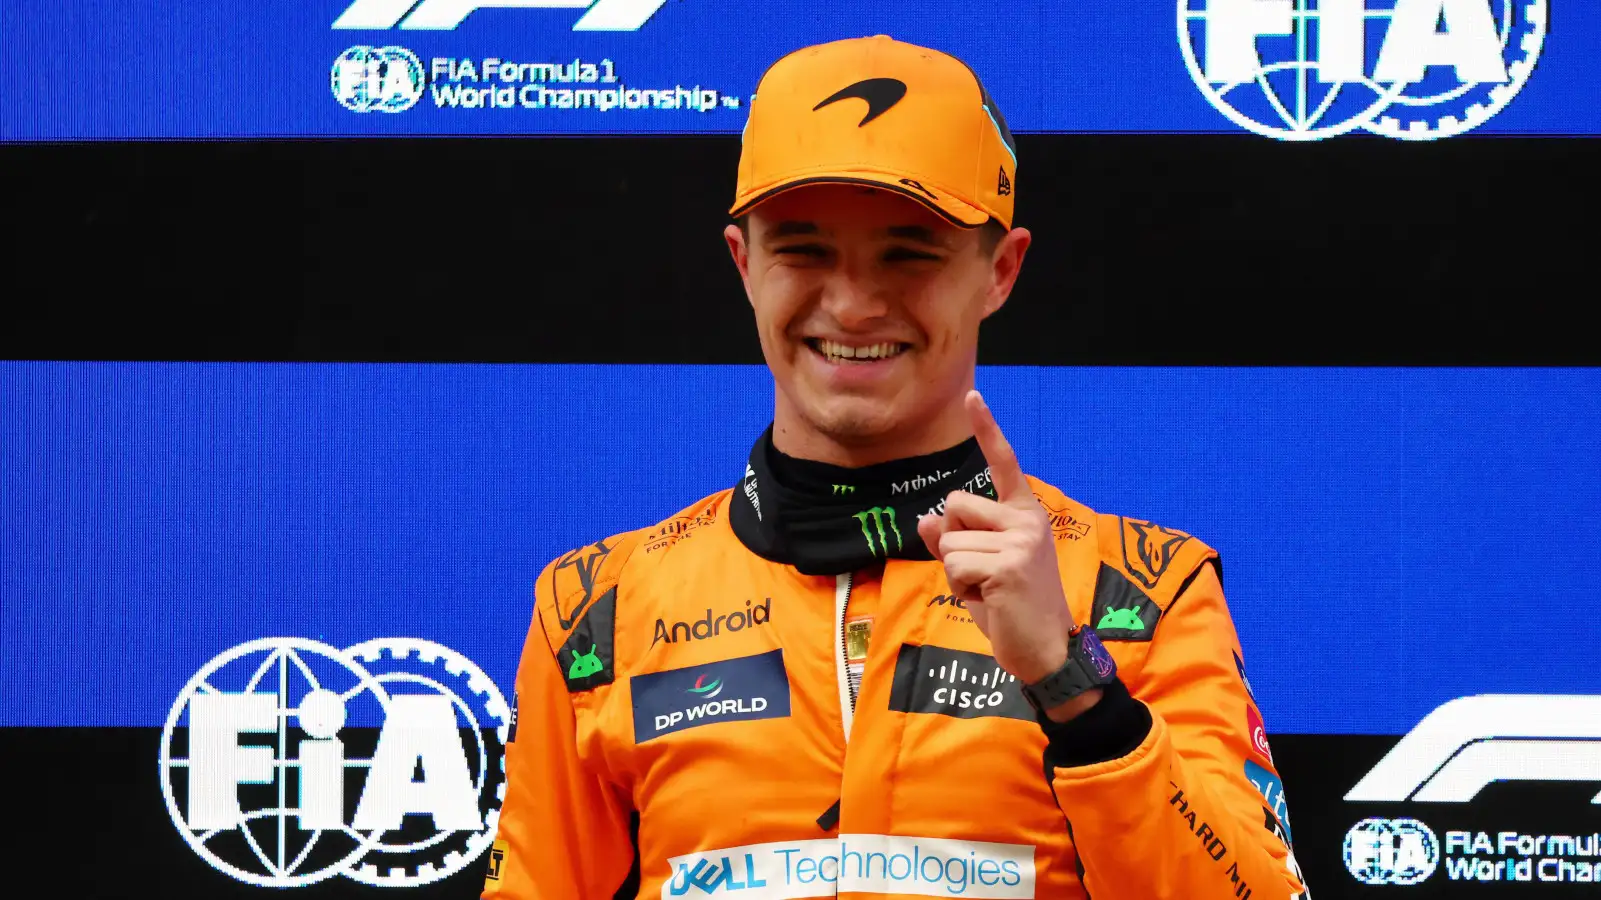 Miami Grand Prix: Lando Norris ends wait for first F1 win after Verstappen ‘disaster’